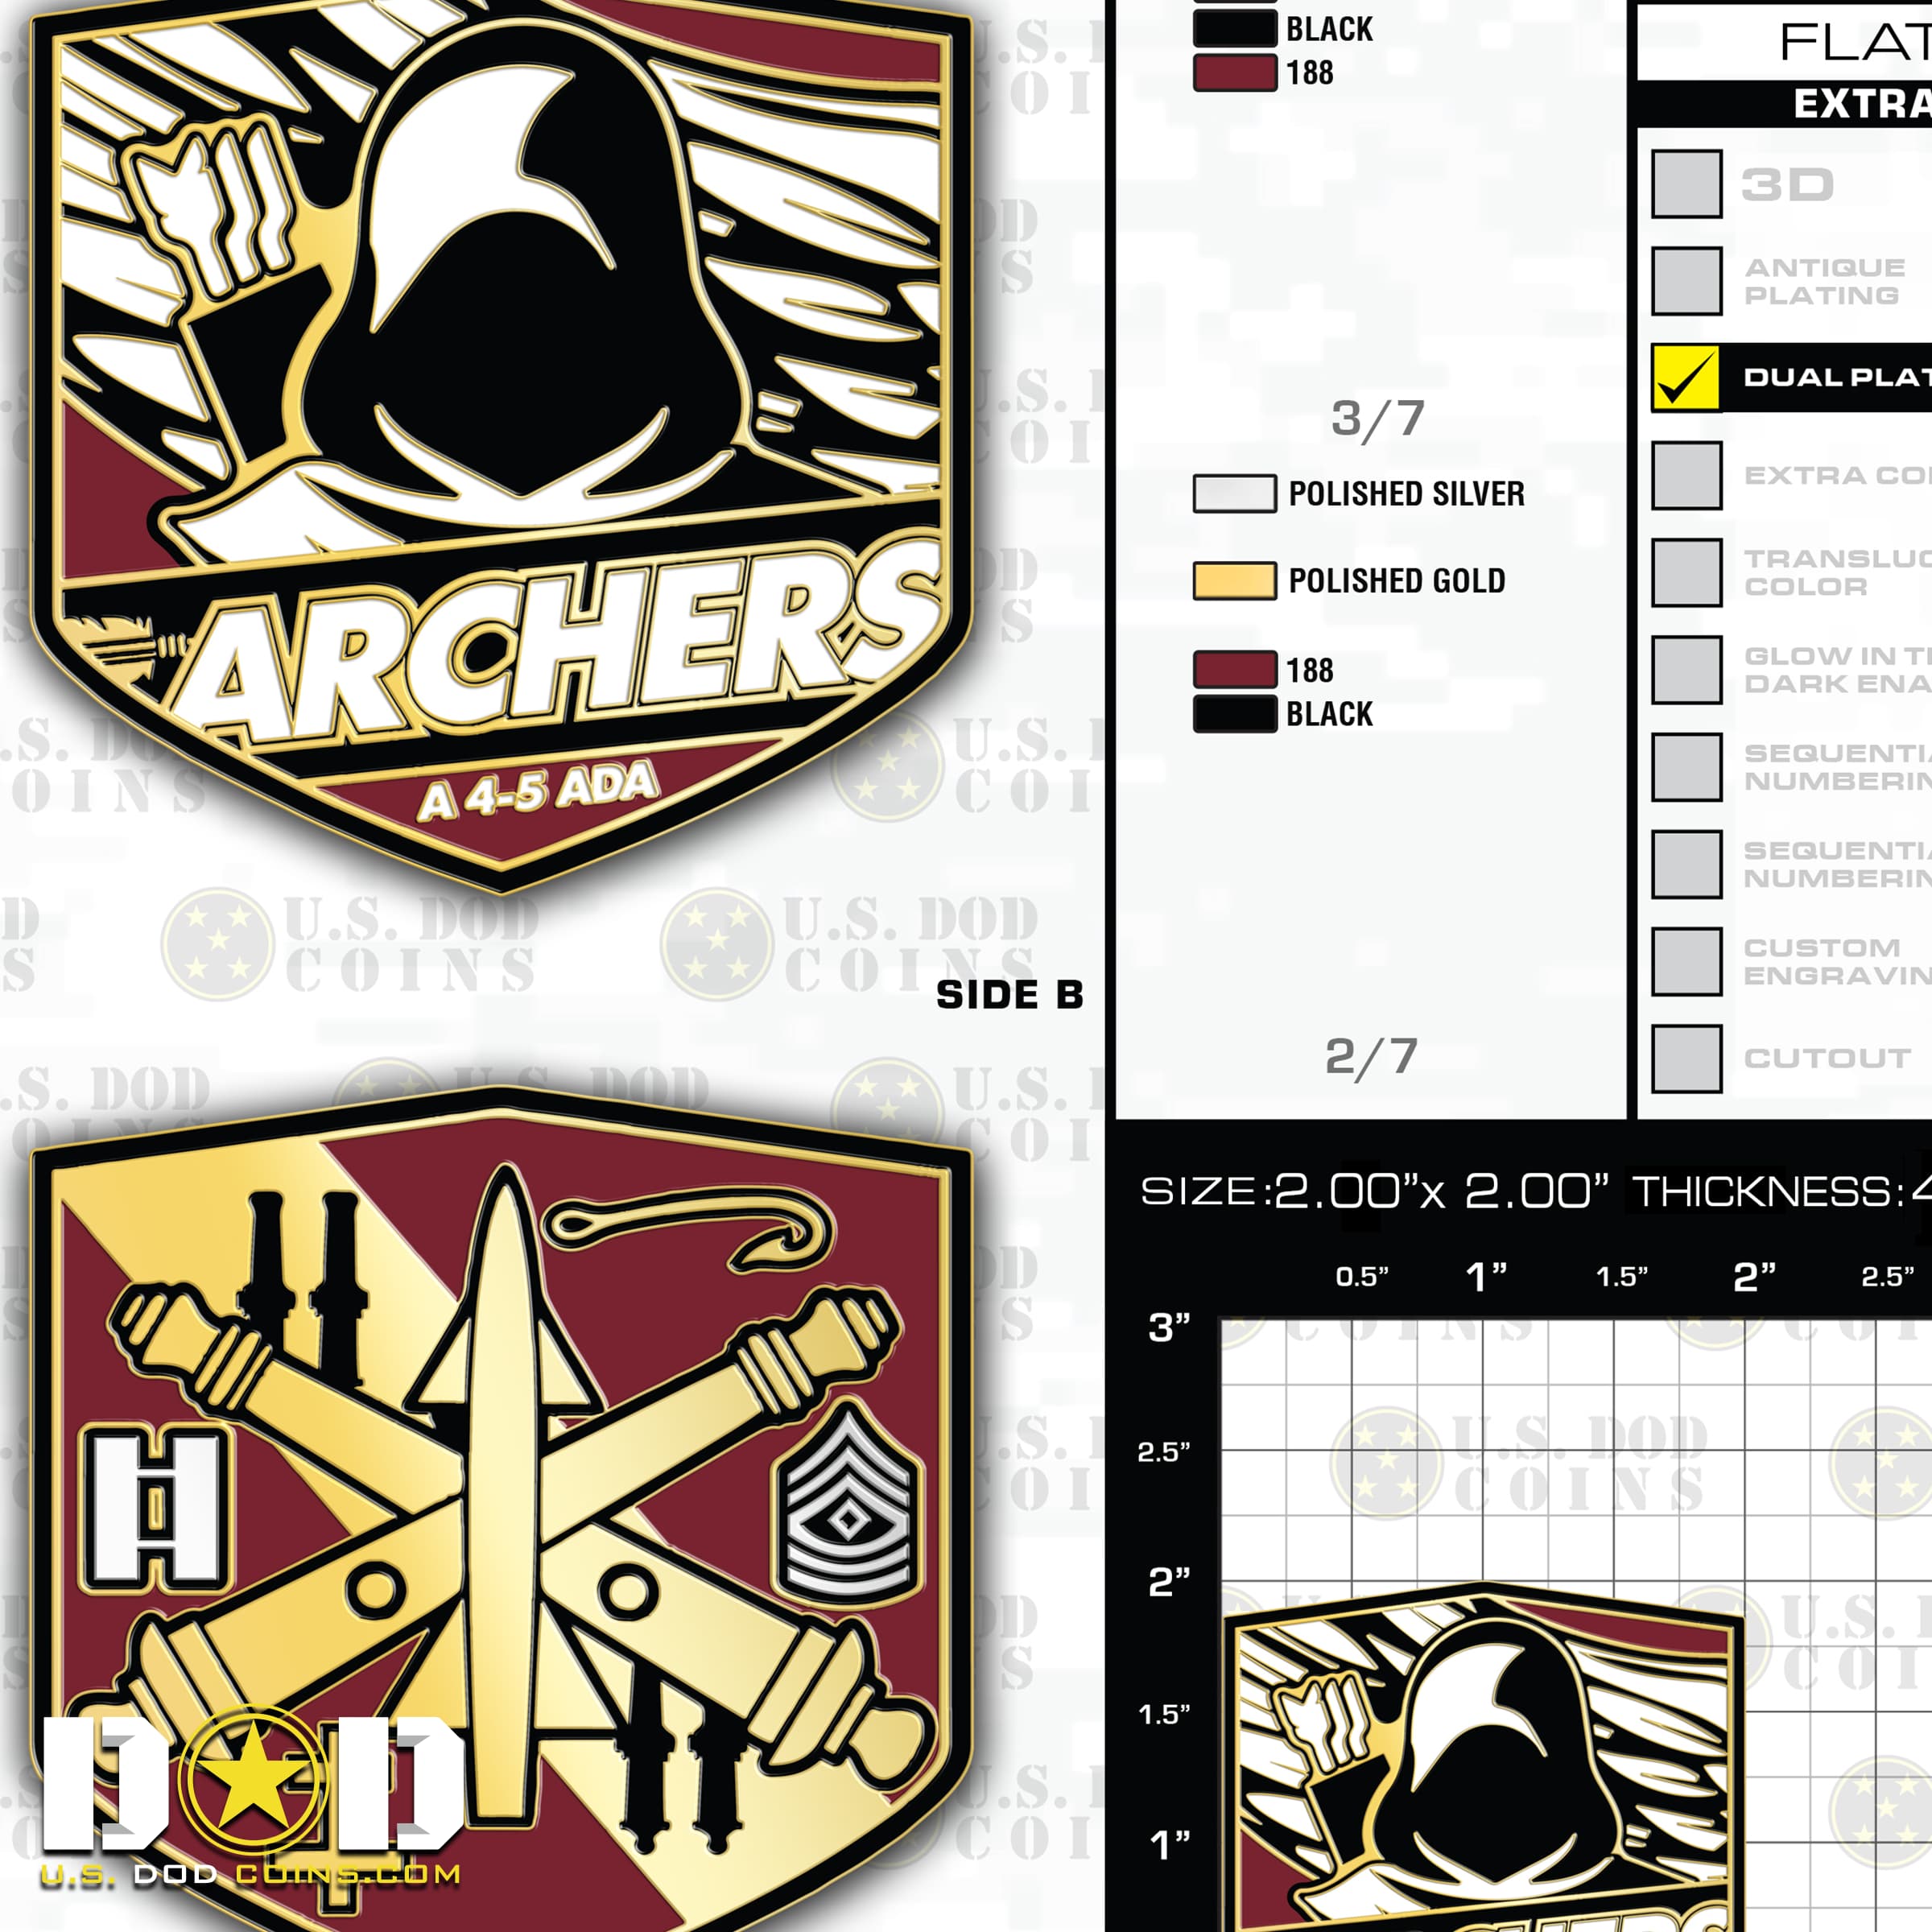 Archers-A-4-5-ADA-Challenge-Coin_0000_PROOF-2